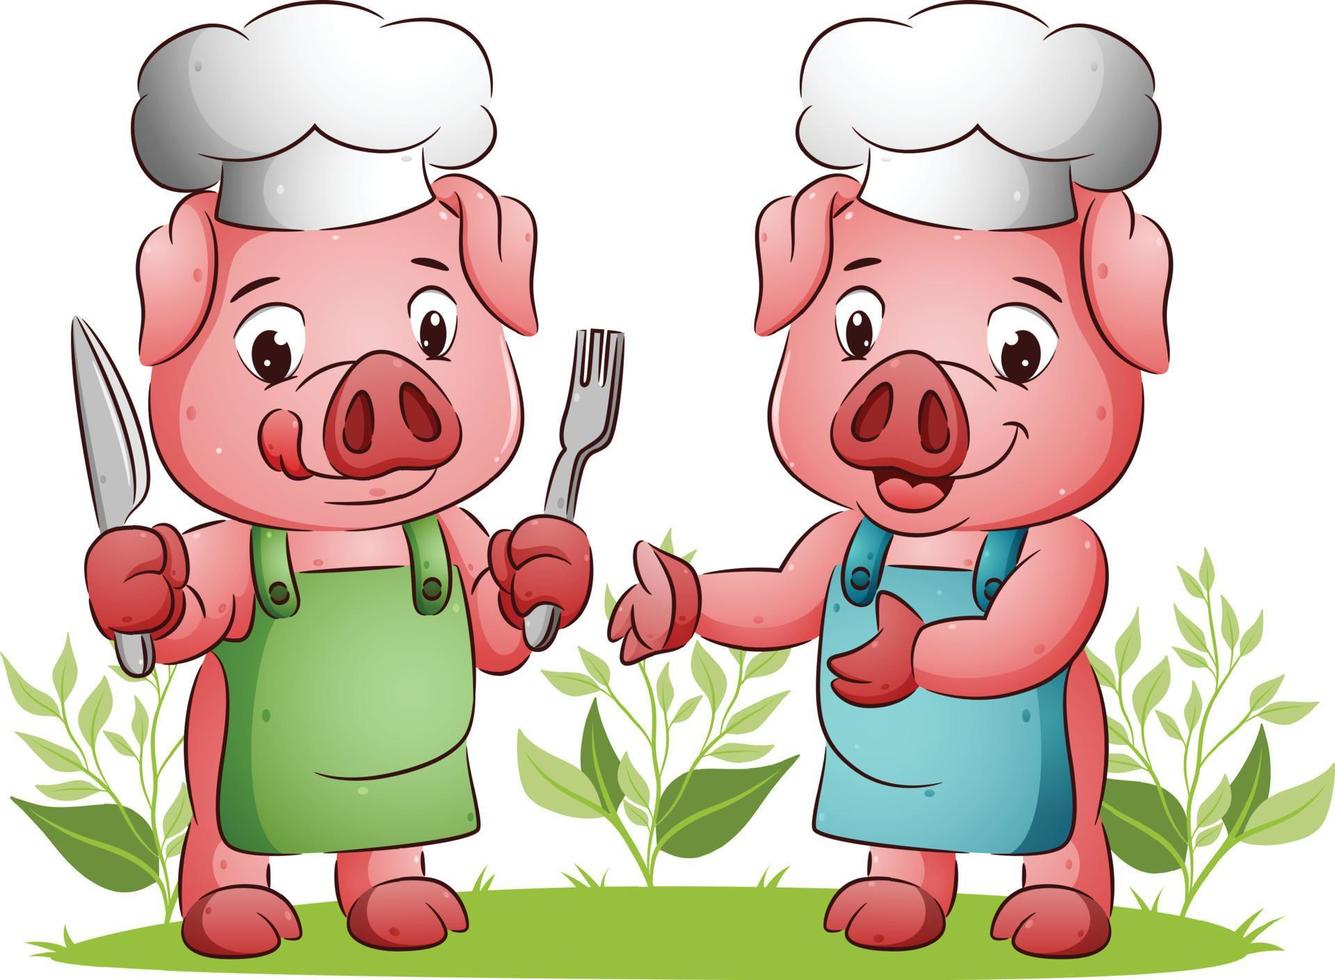 The couple of pig is ready for eating with holding the spoon and fork vector